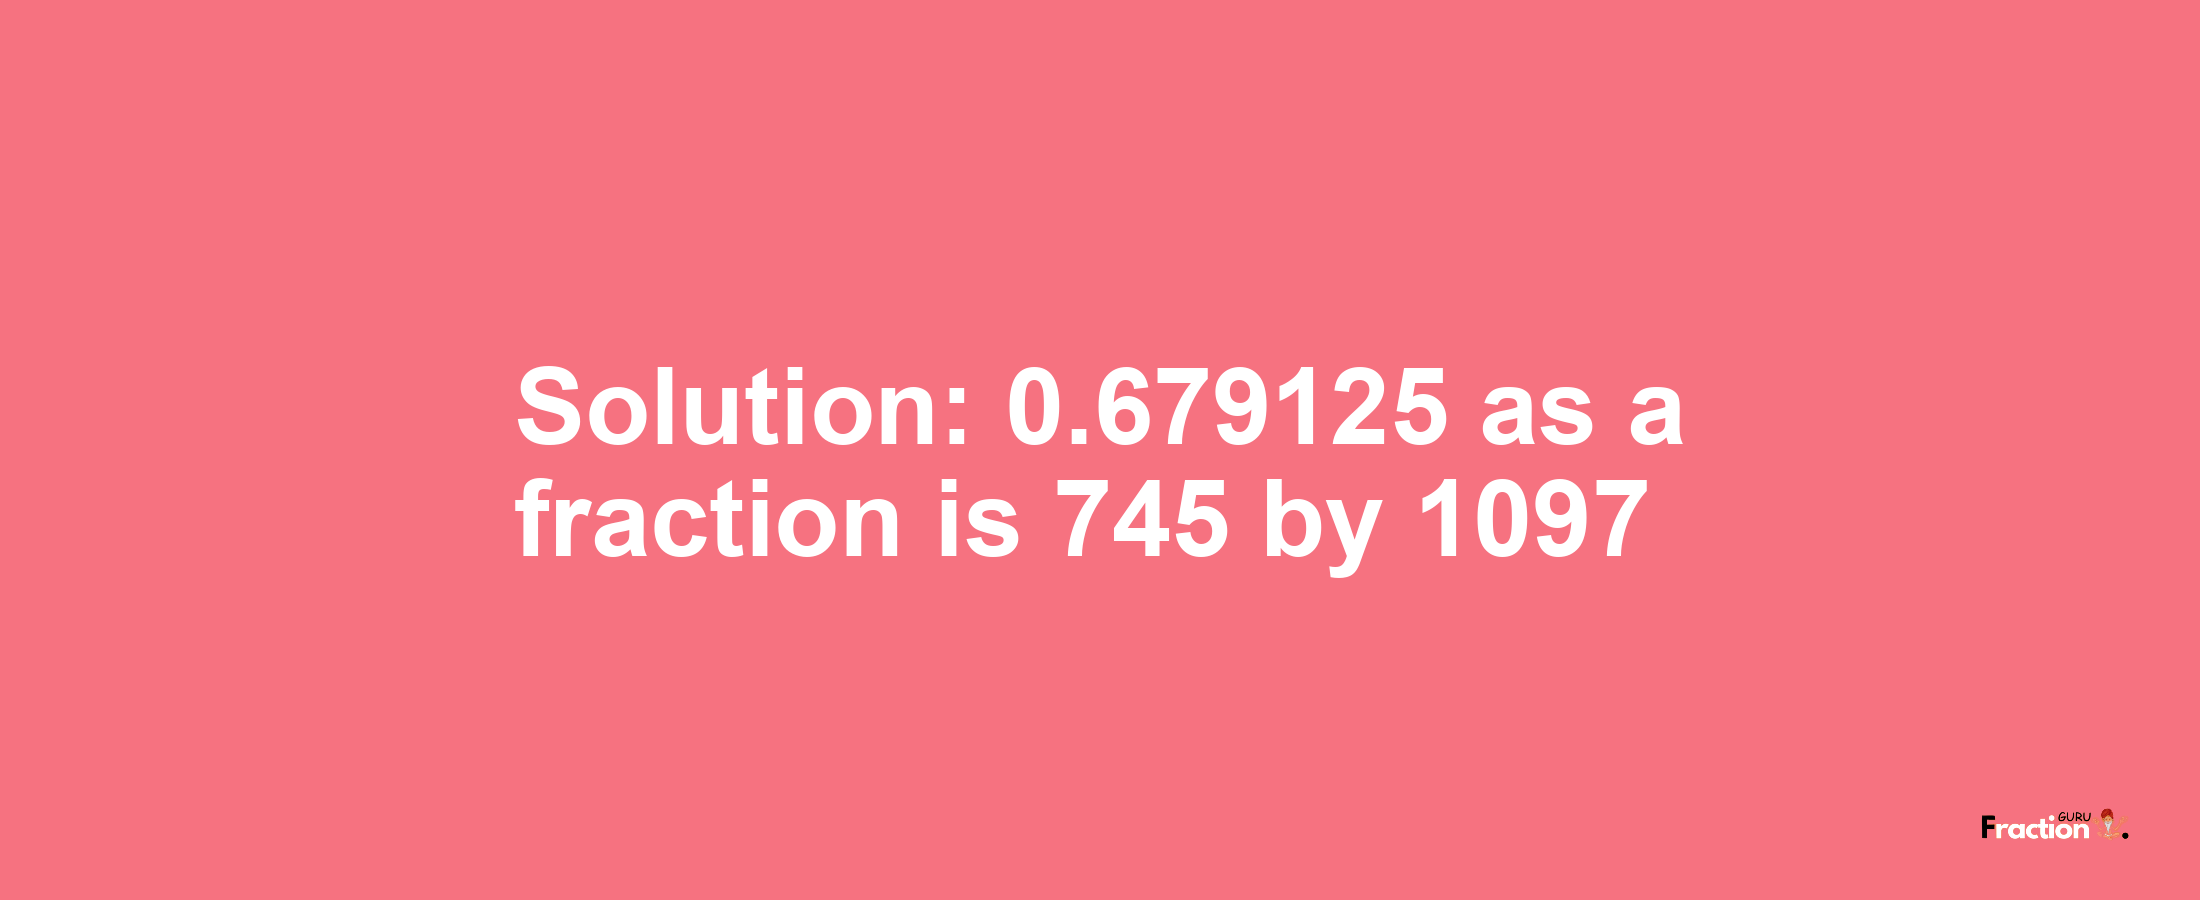 Solution:0.679125 as a fraction is 745/1097